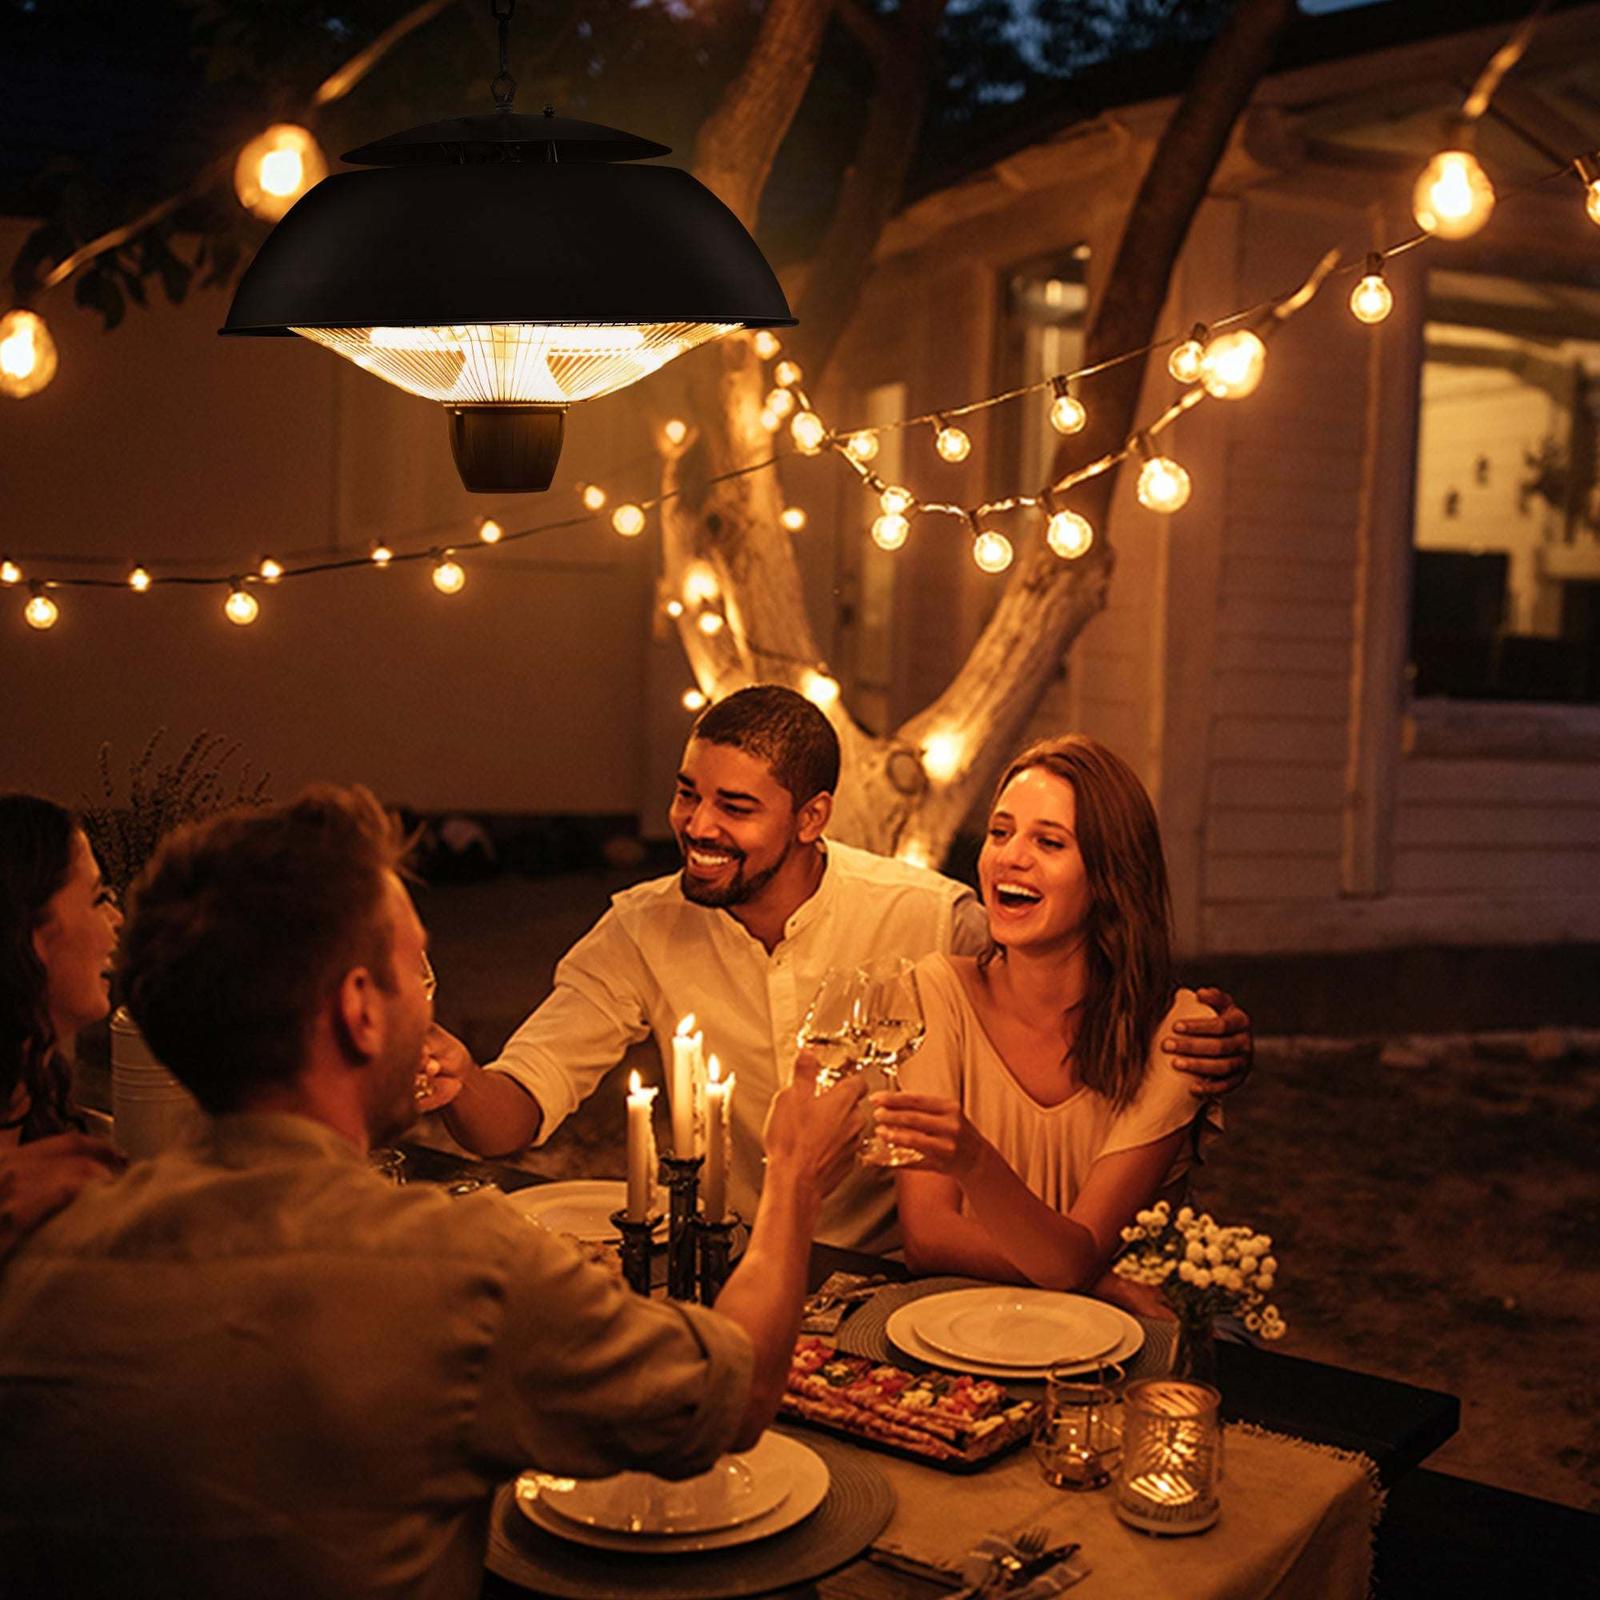 Friends dining outdoors with string lights.